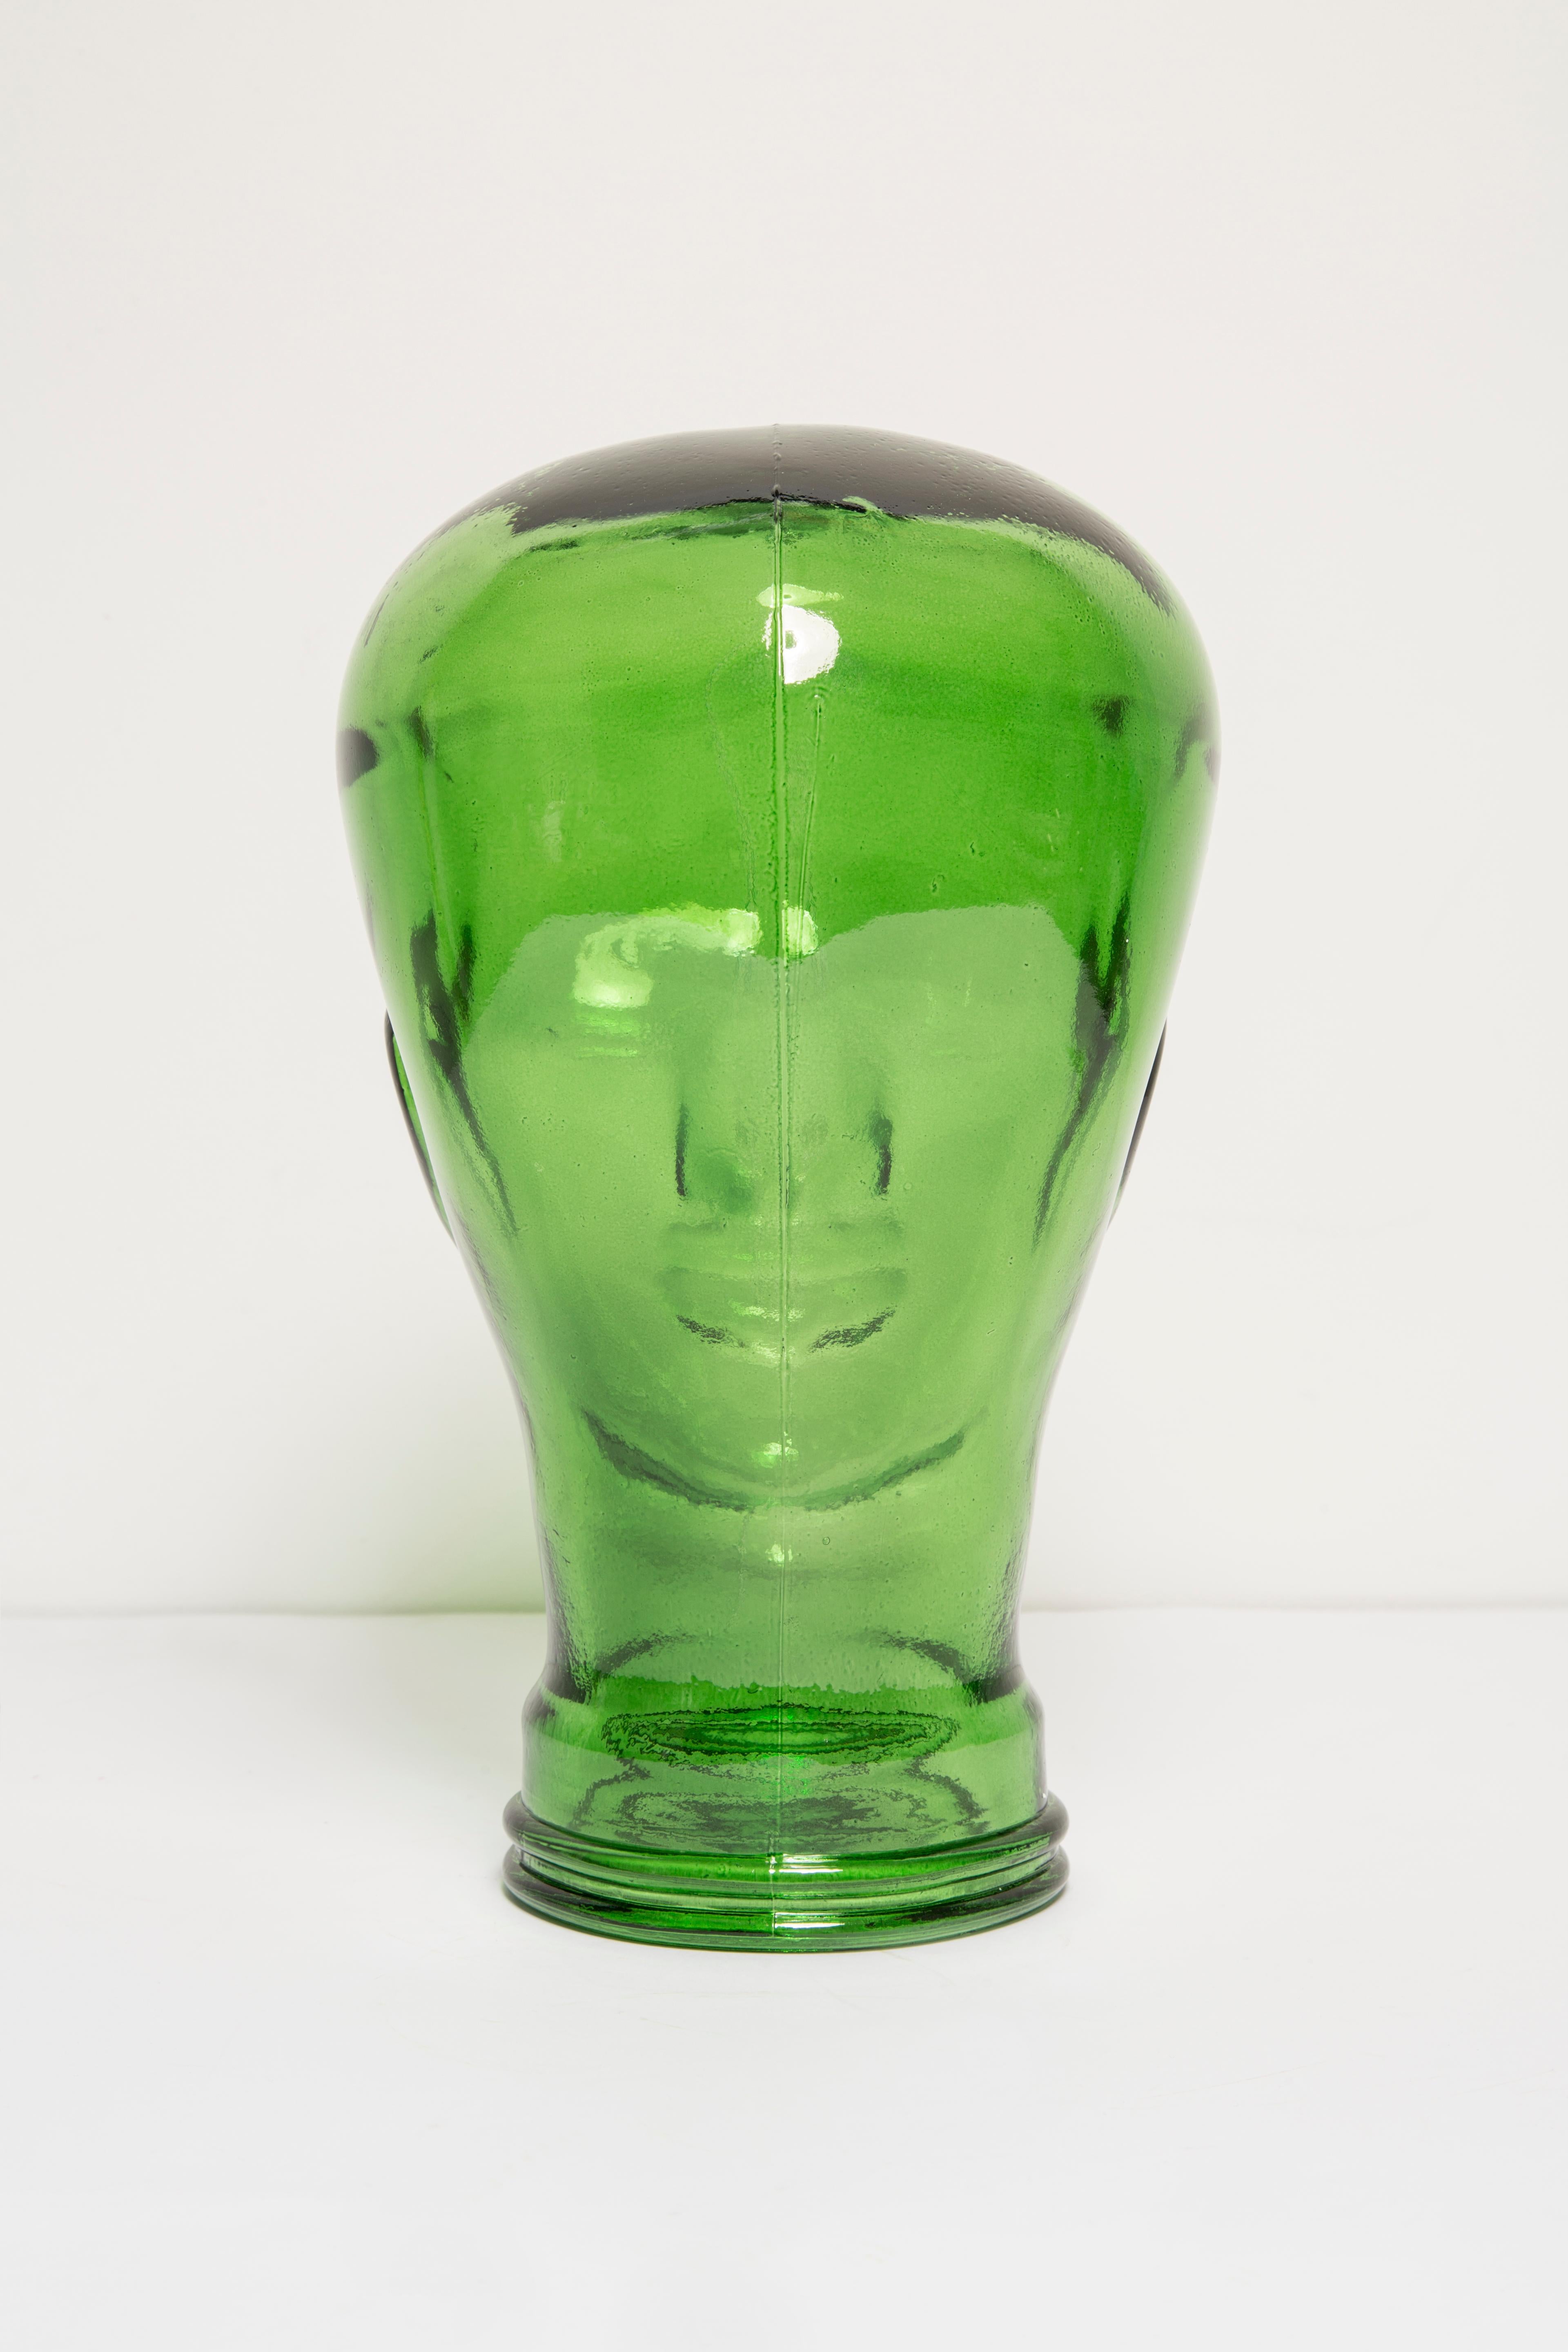 20th Century Green Vintage Decorative Mannequin Glass Head Sculpture, 1970s, Germany